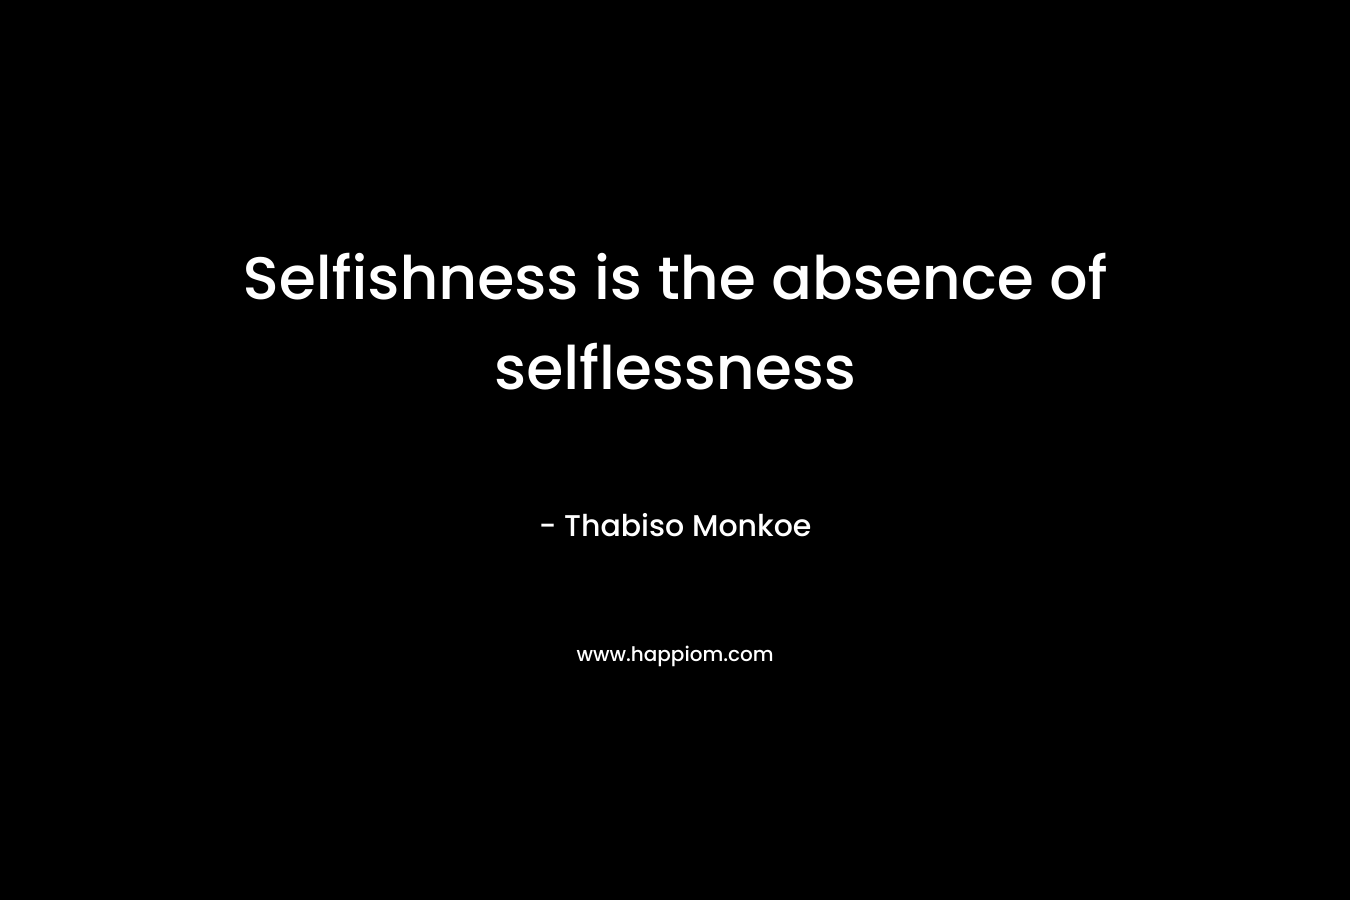 Selfishness is the absence of selflessness